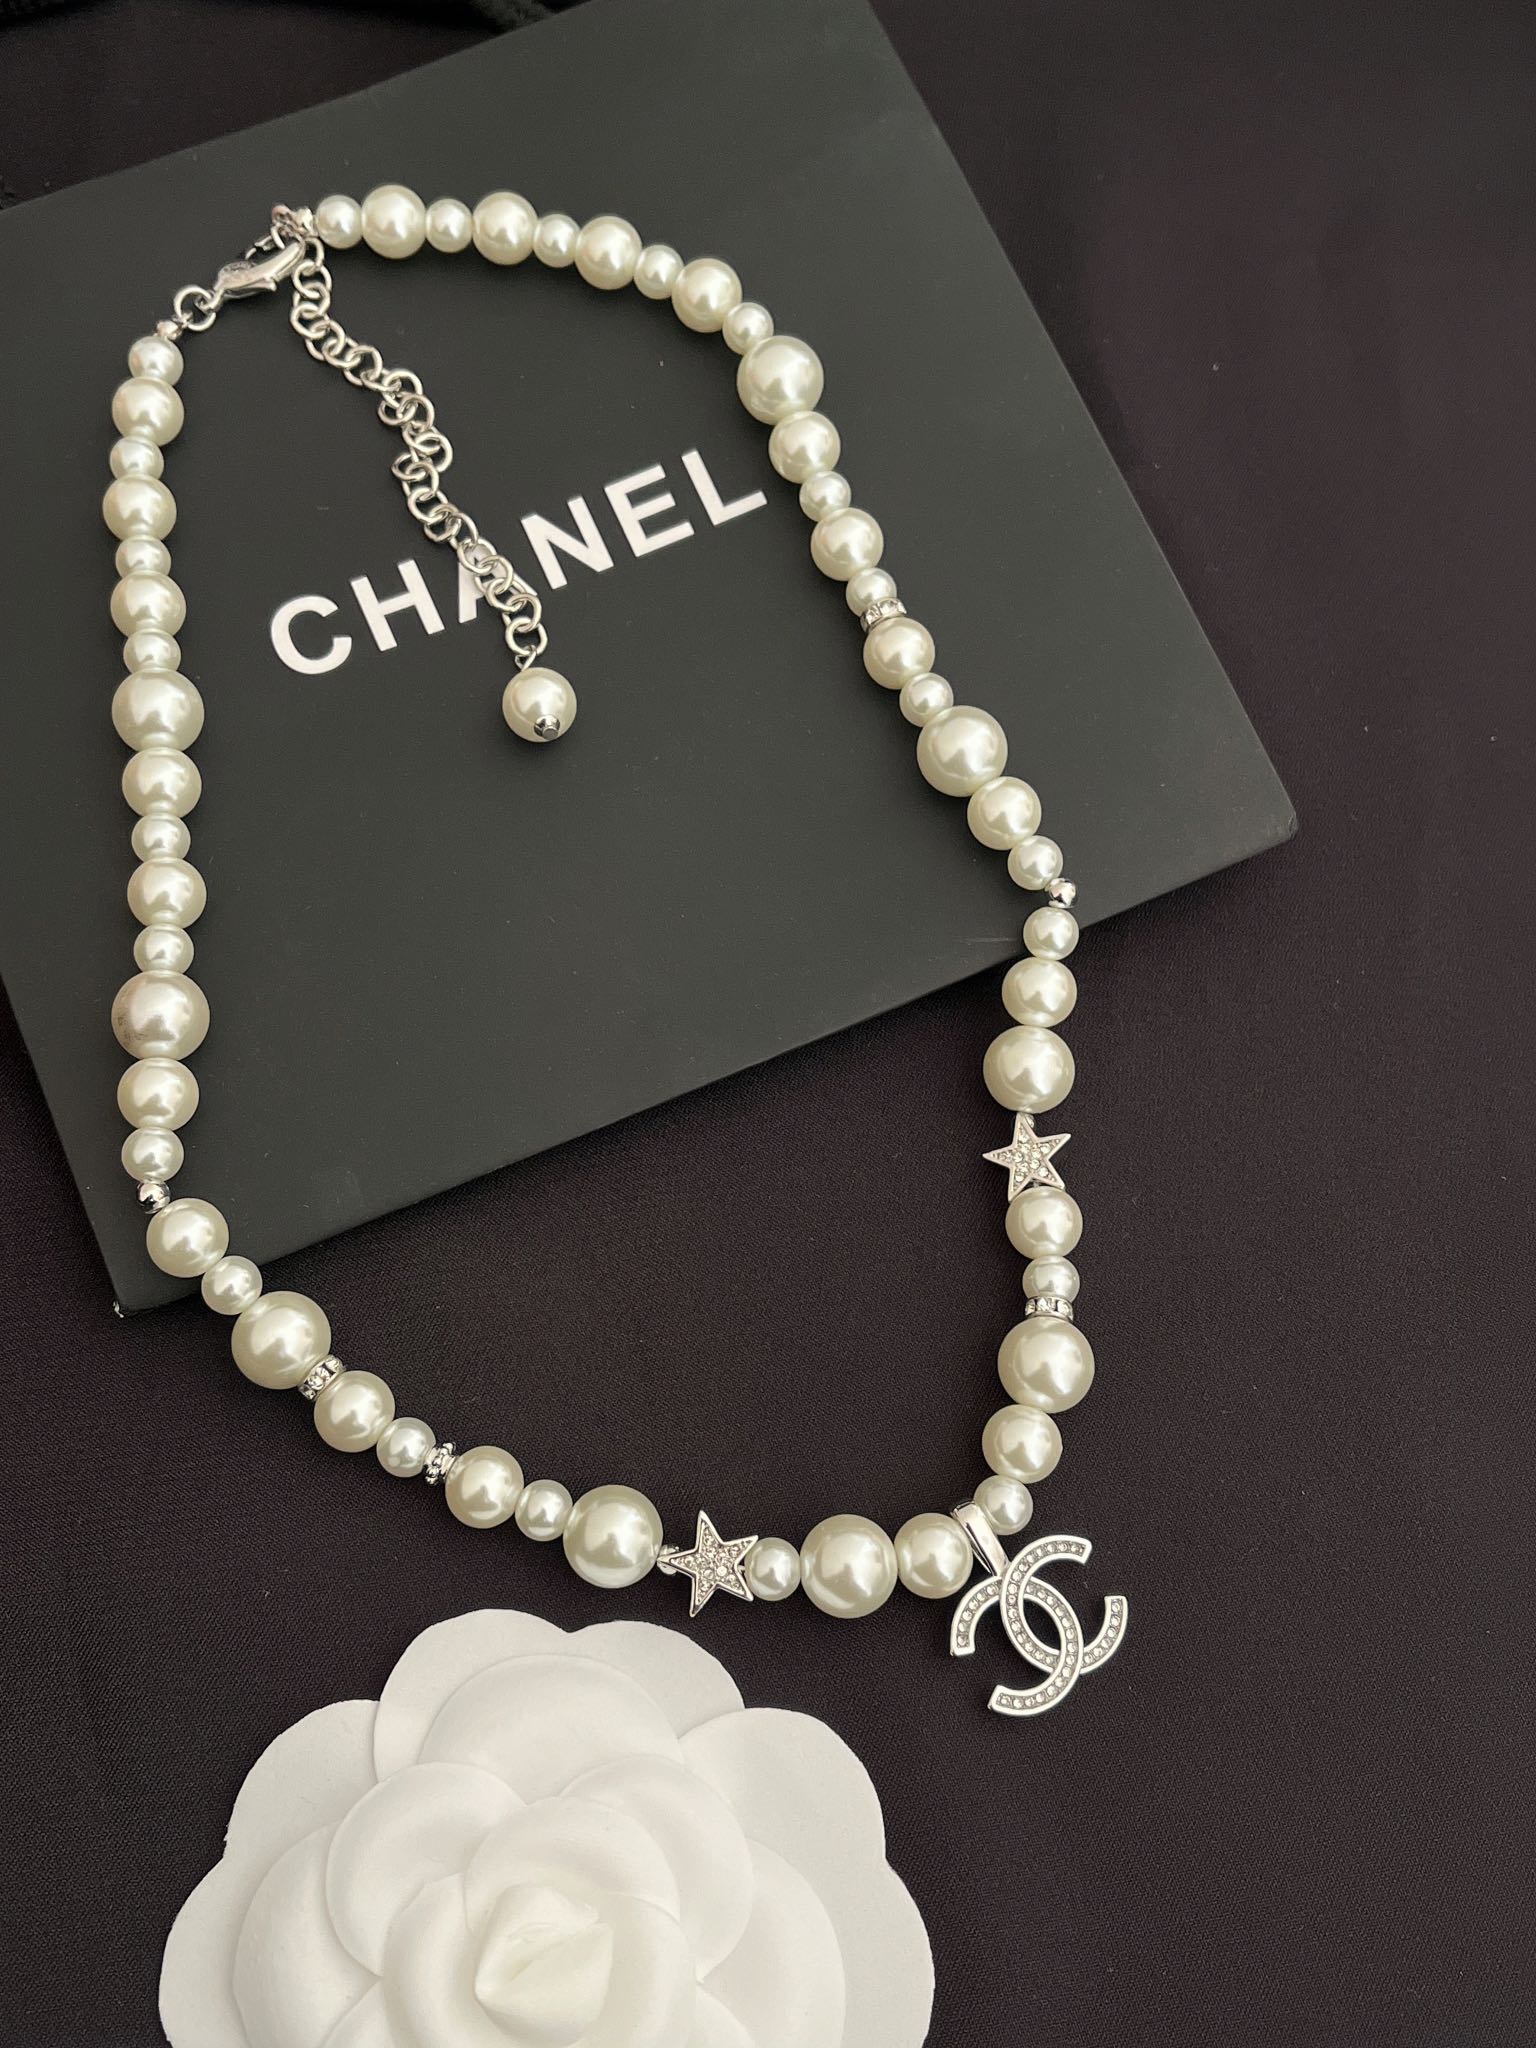 X577 Chanel pearls choker necklace